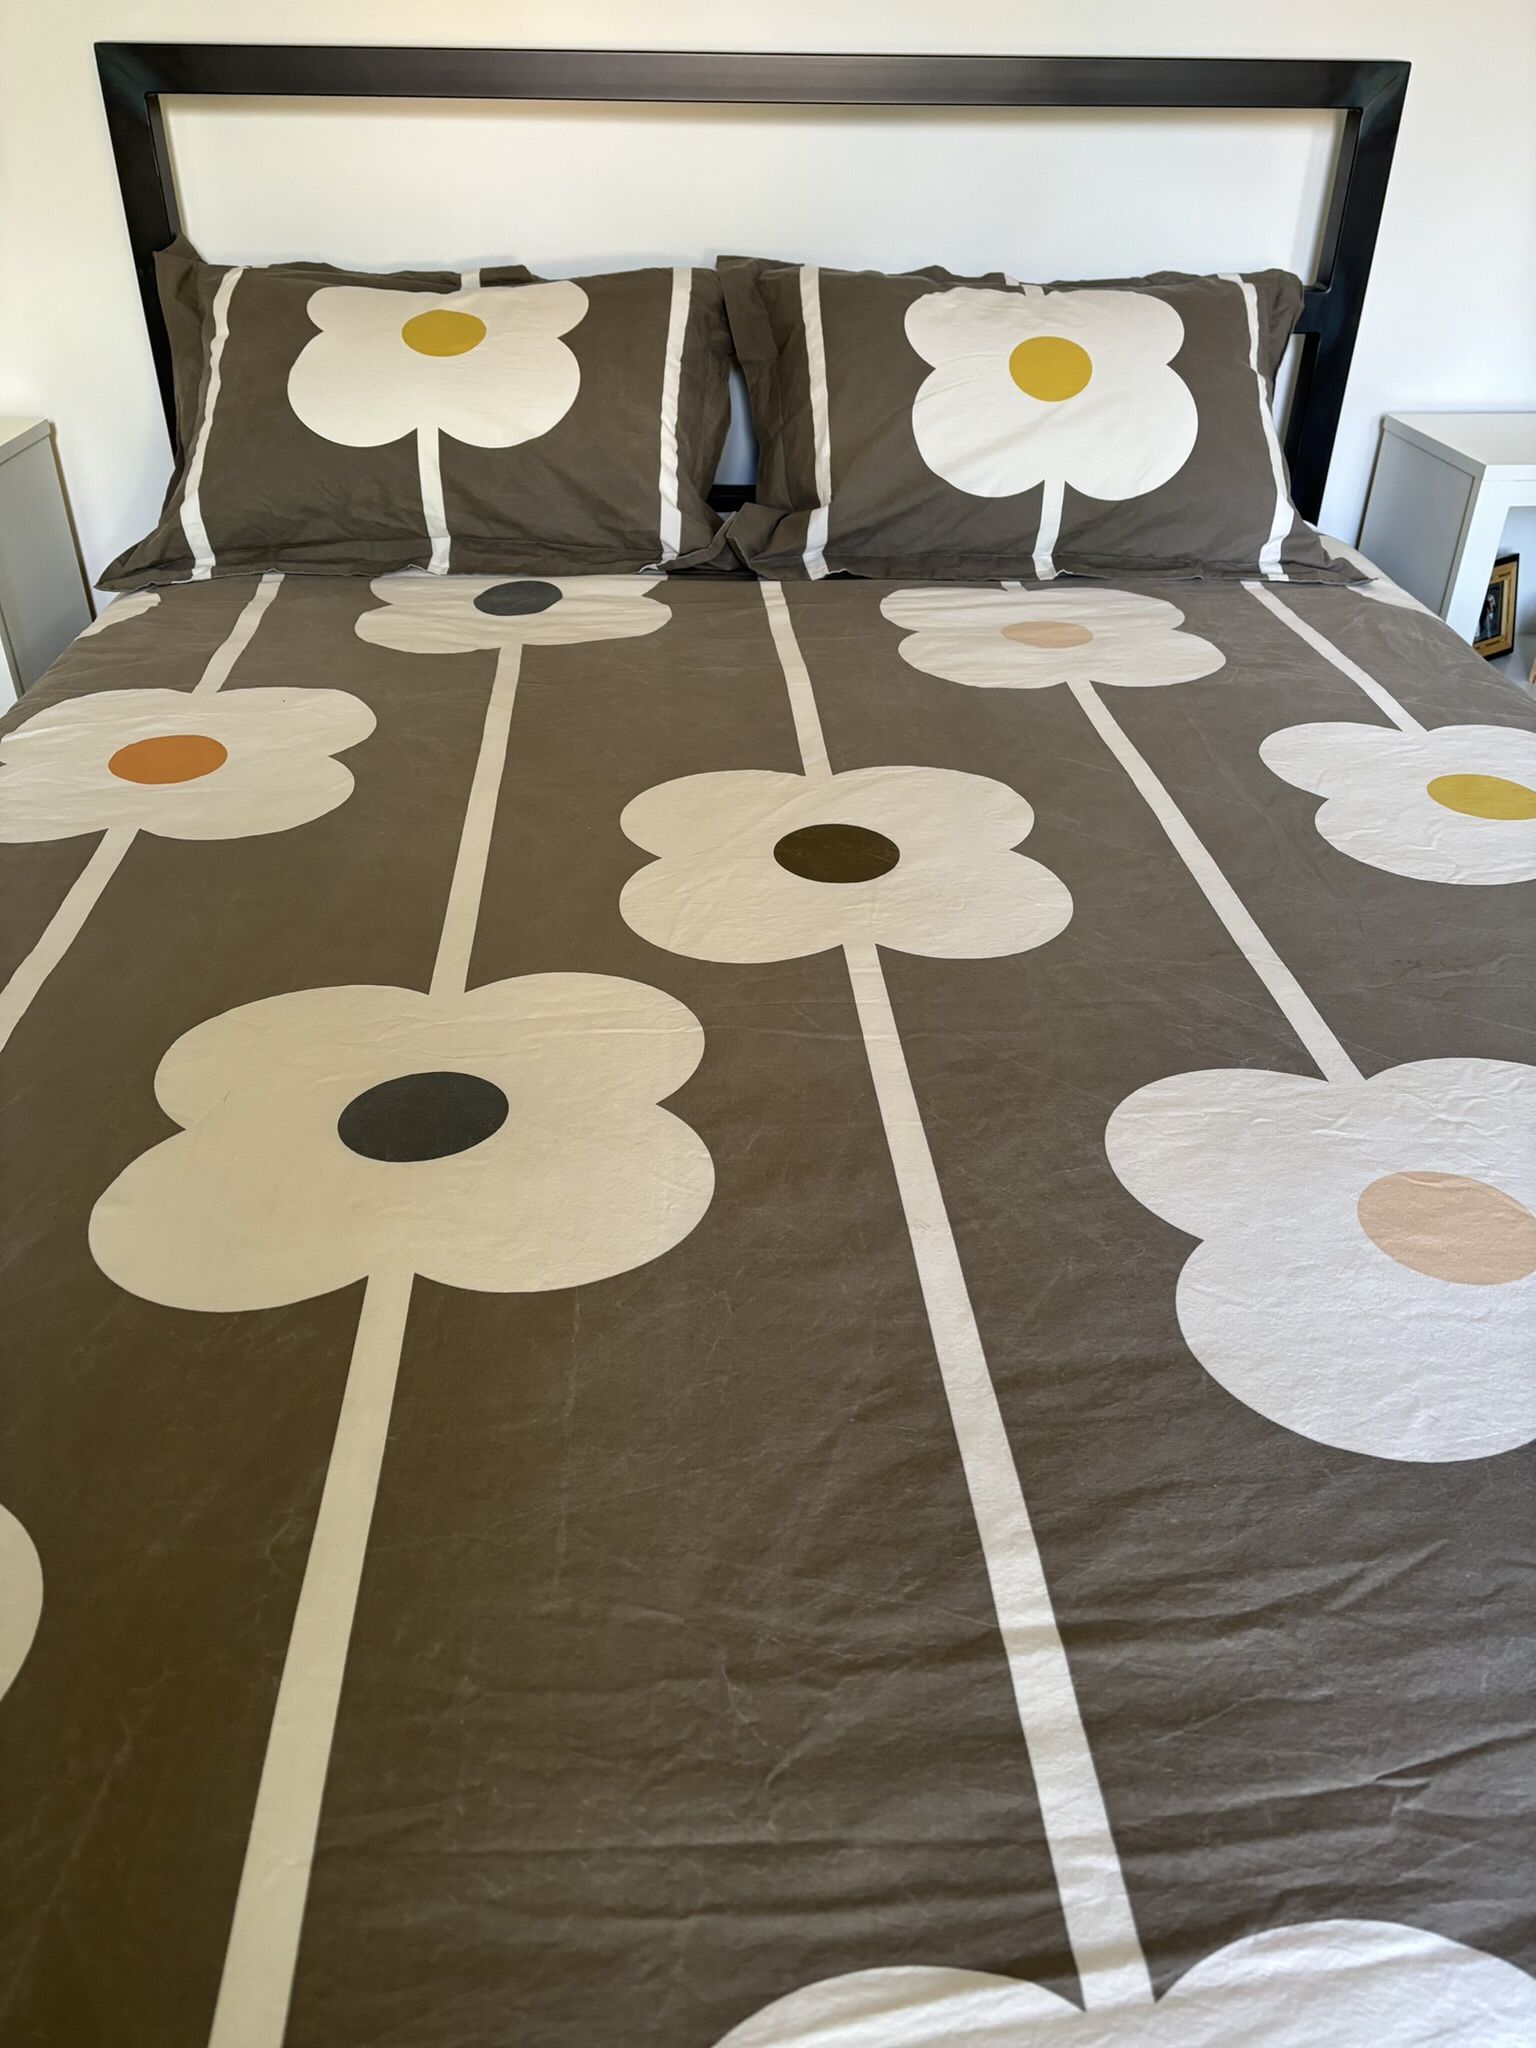 Queen Size Orla Kiely Duvet Cover and Shams